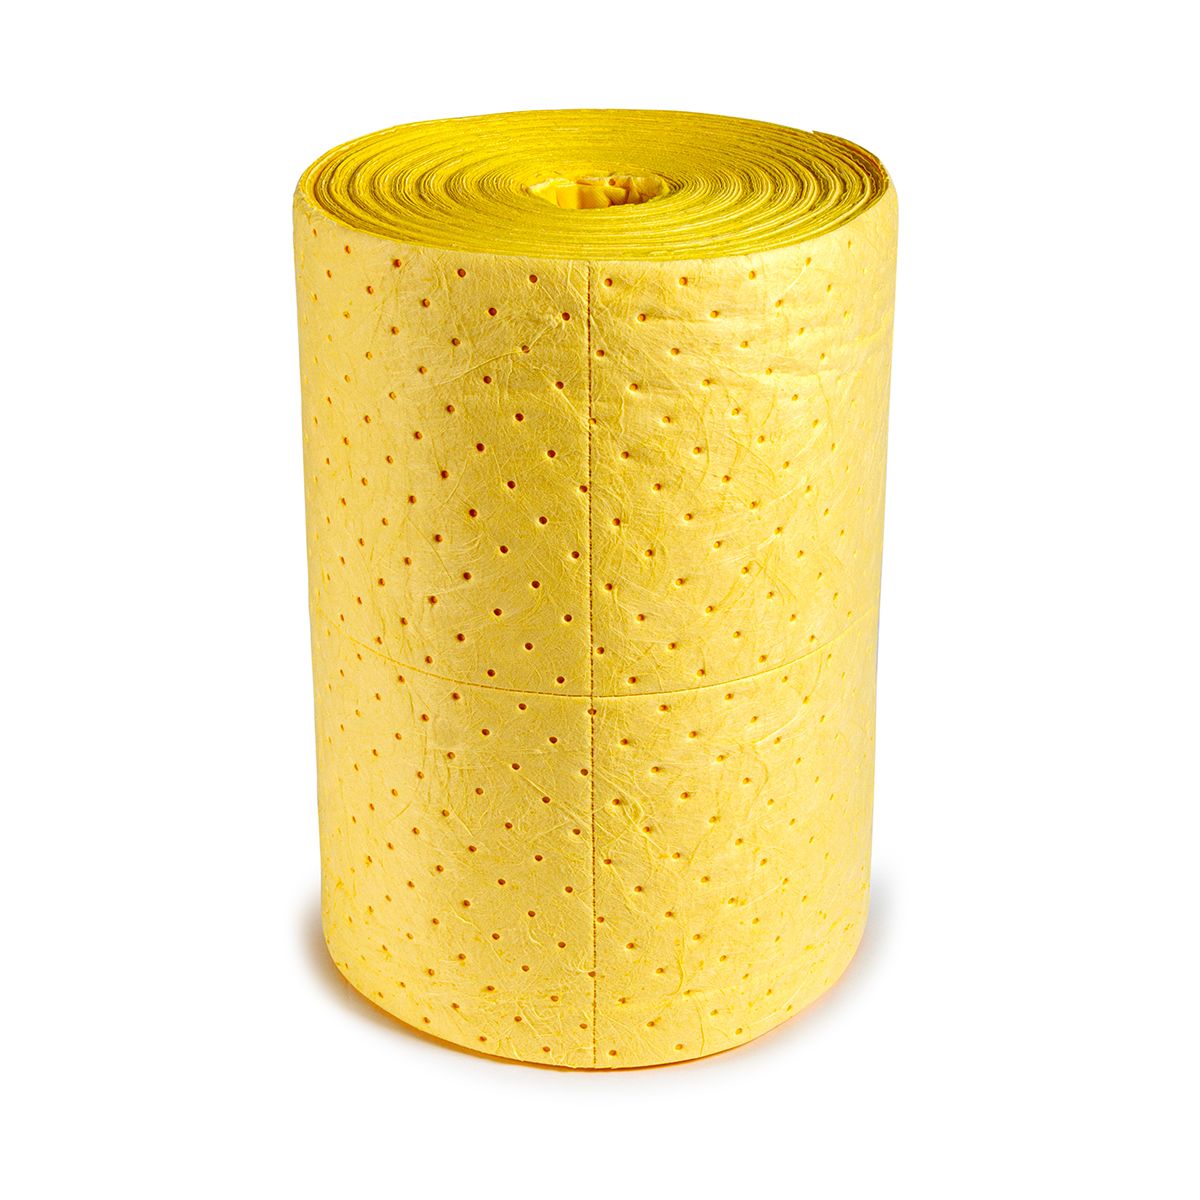 RS PRO Spill Absorbent Roll for Chemical Use, 80 L Capacity, 1 per Pack